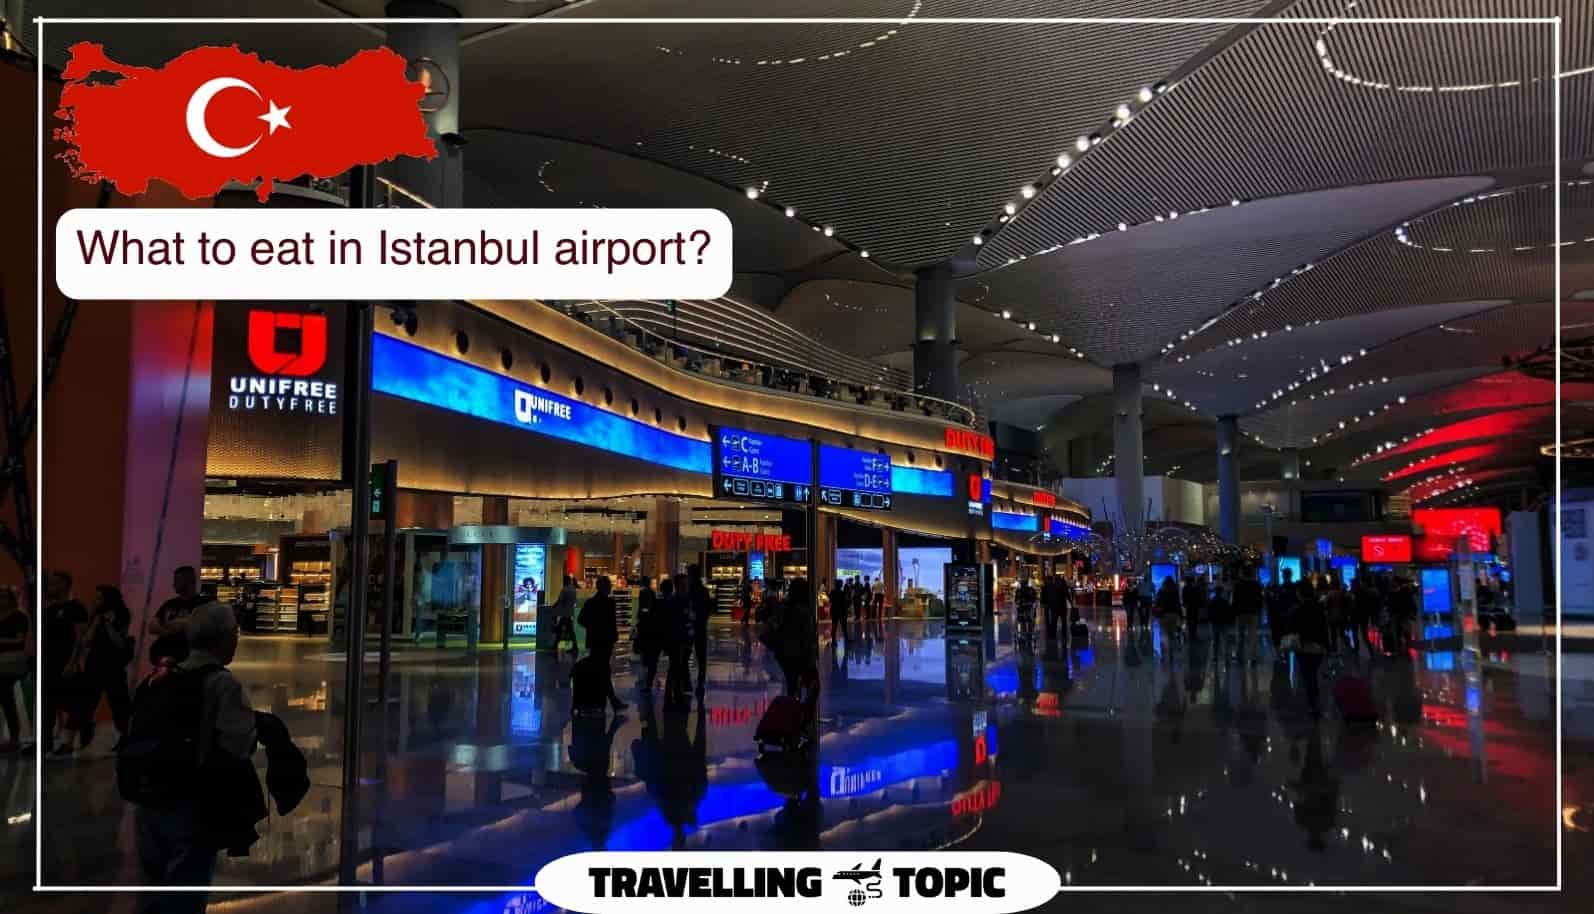 What to eat in the Istanbul airport